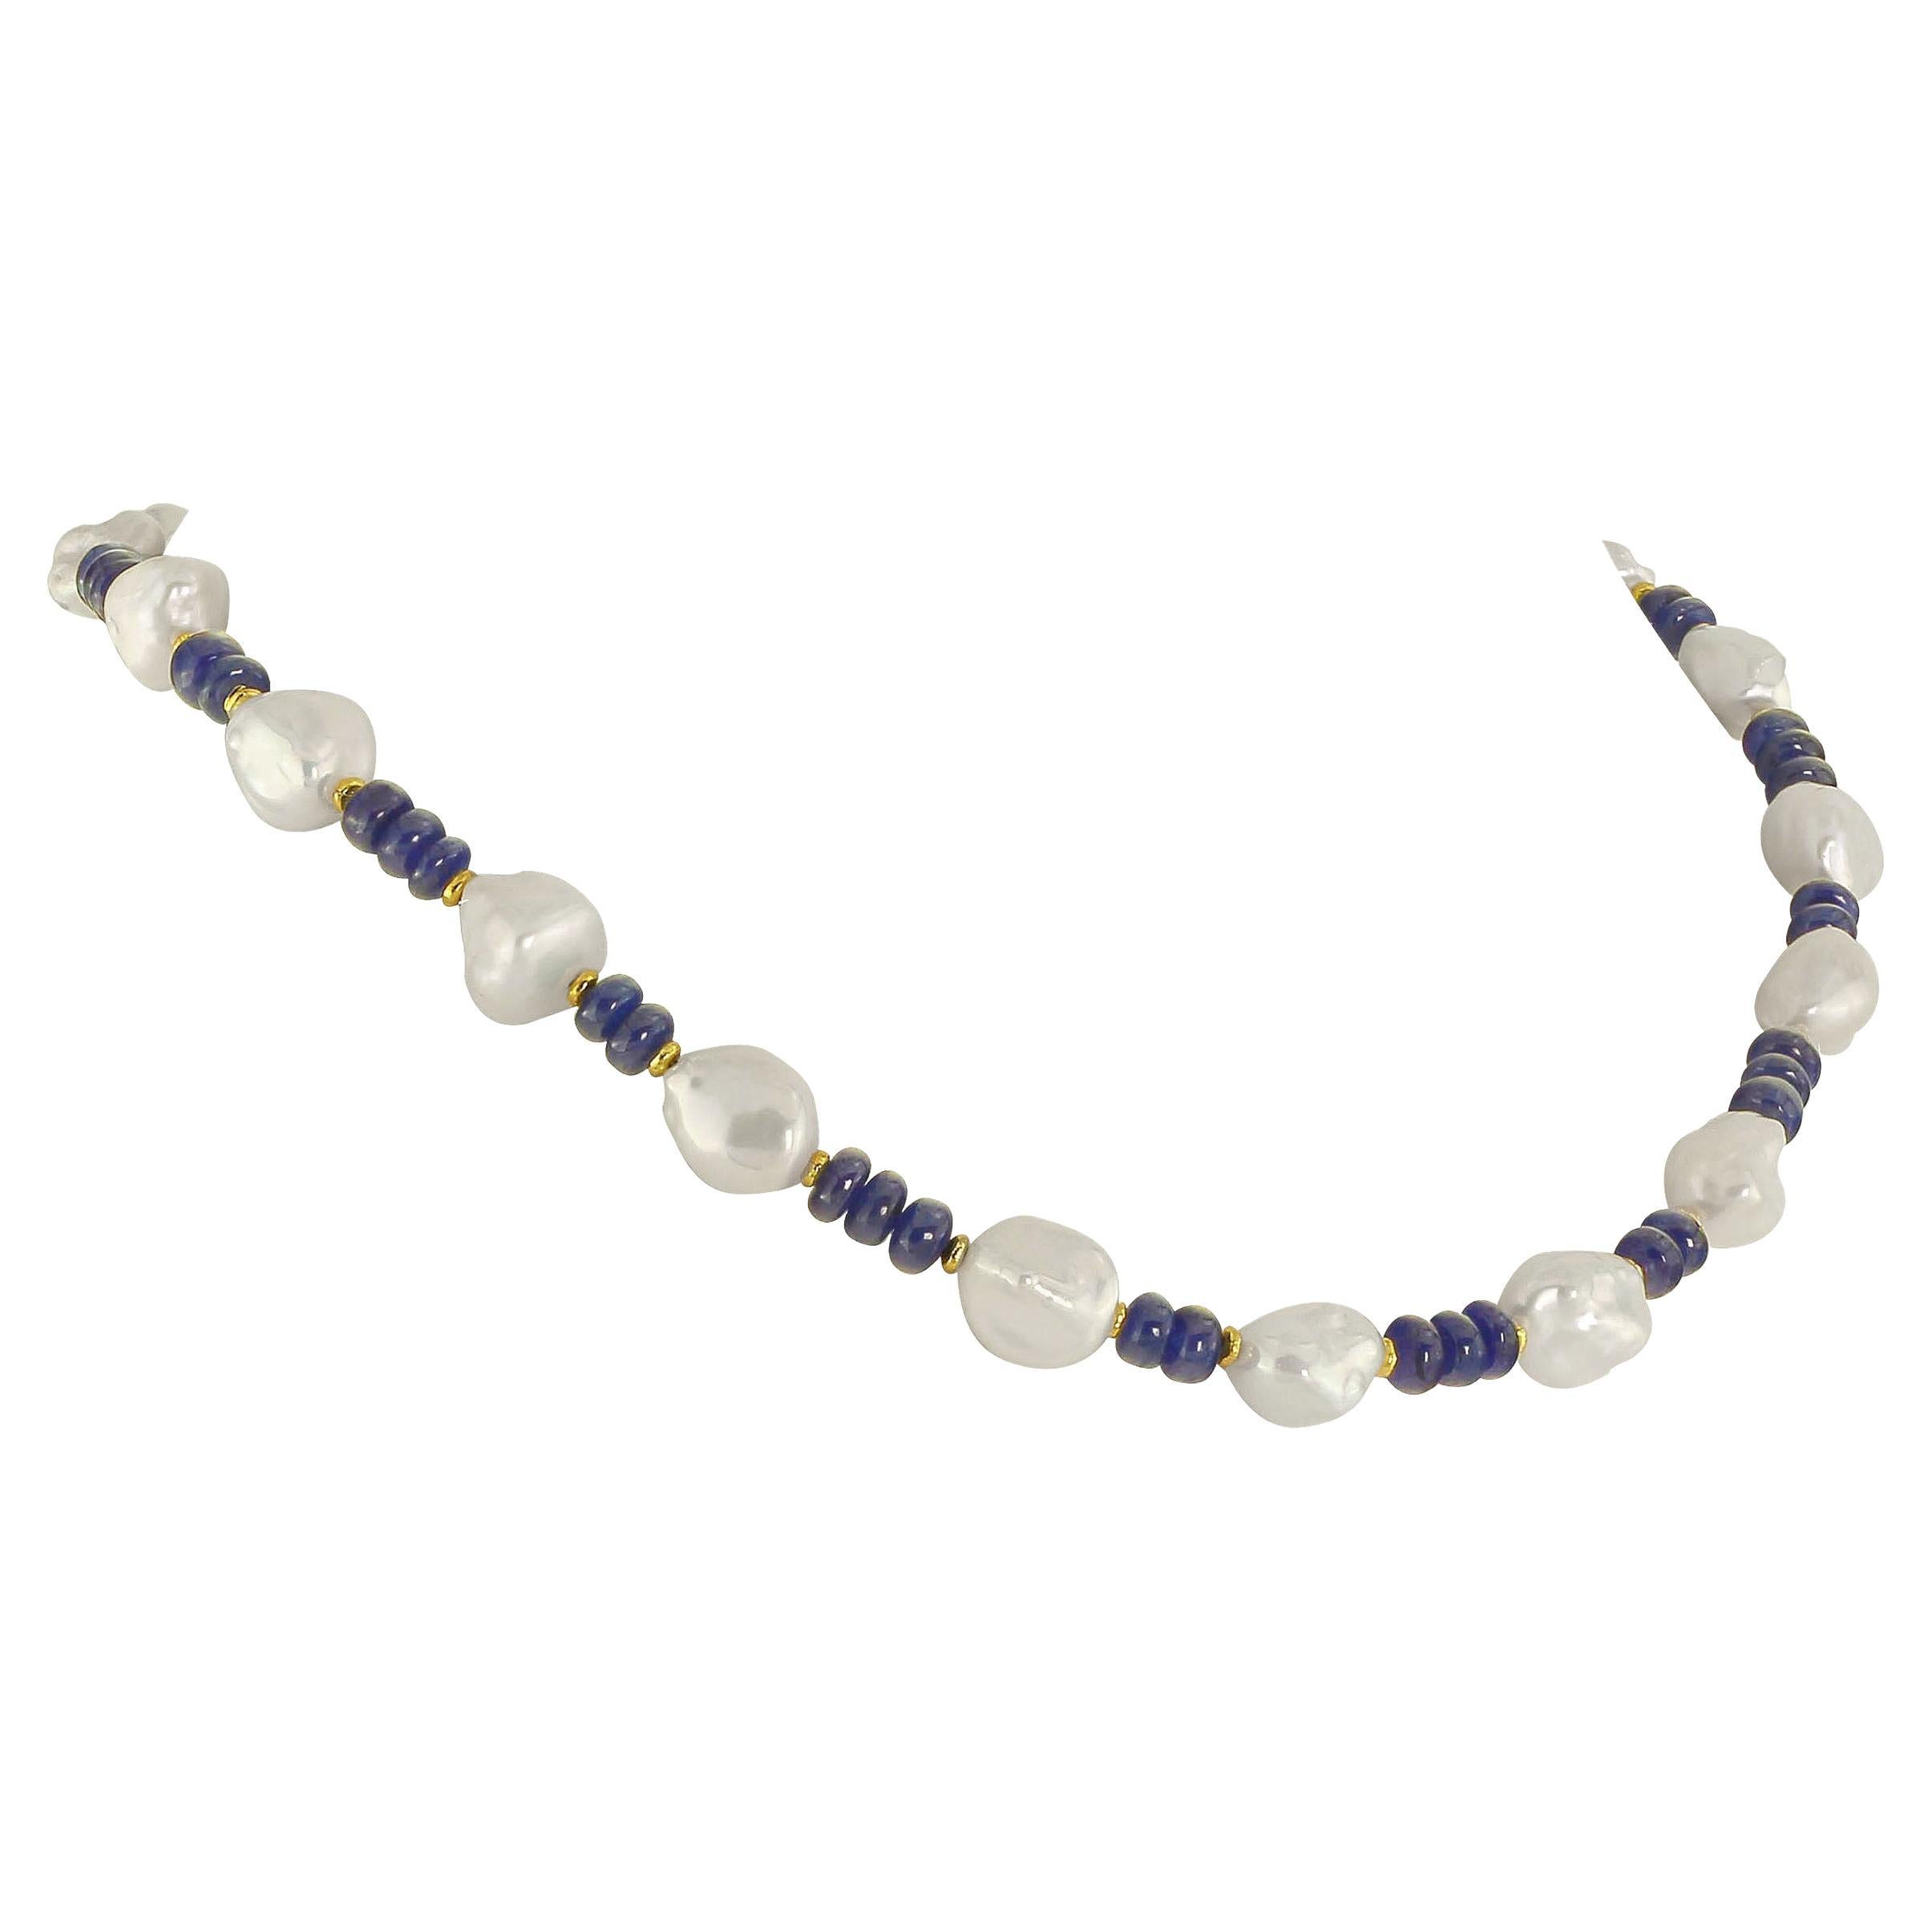 17 inch elegant unique blue Sapphire and white Freshwater Pearl necklace. These are highly polished smoothe rondelles of blue Sapphire (5 MM) with gold tone accents. The lustrous white Chinese Freshwater Pearls (11 MM) are Second Harvest. Together